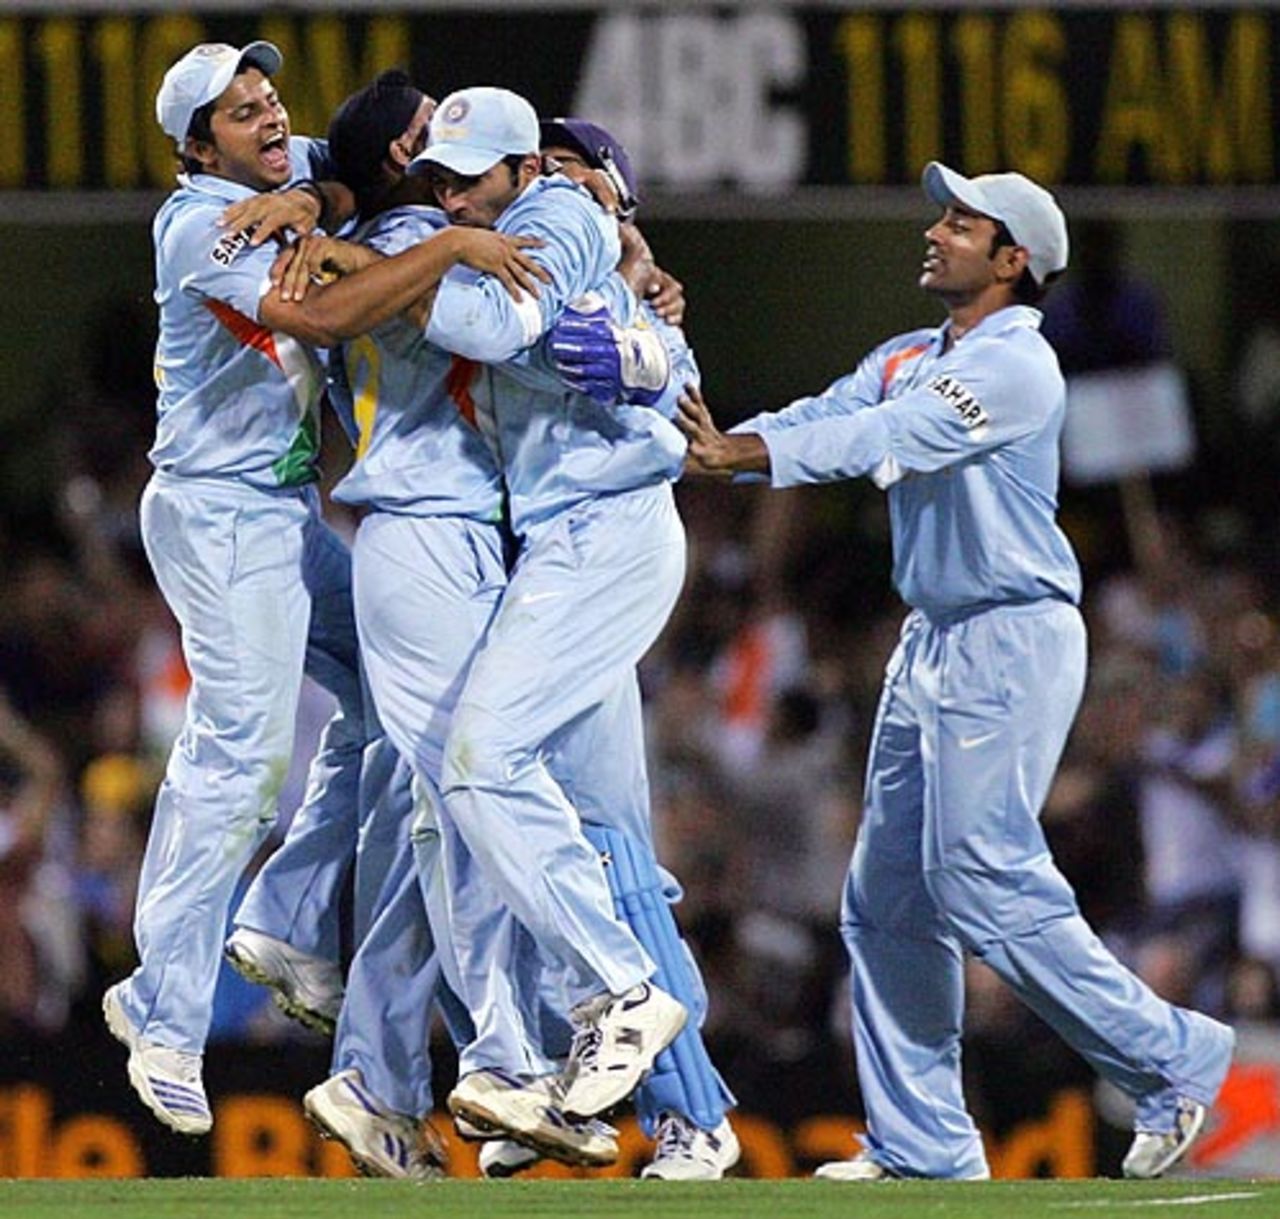 Harbhajan Singh is mobbed by his team-mates after the Hayden run-out, Australia v India, CB Series, 2nd final, Brisbane, March 4, 2008 